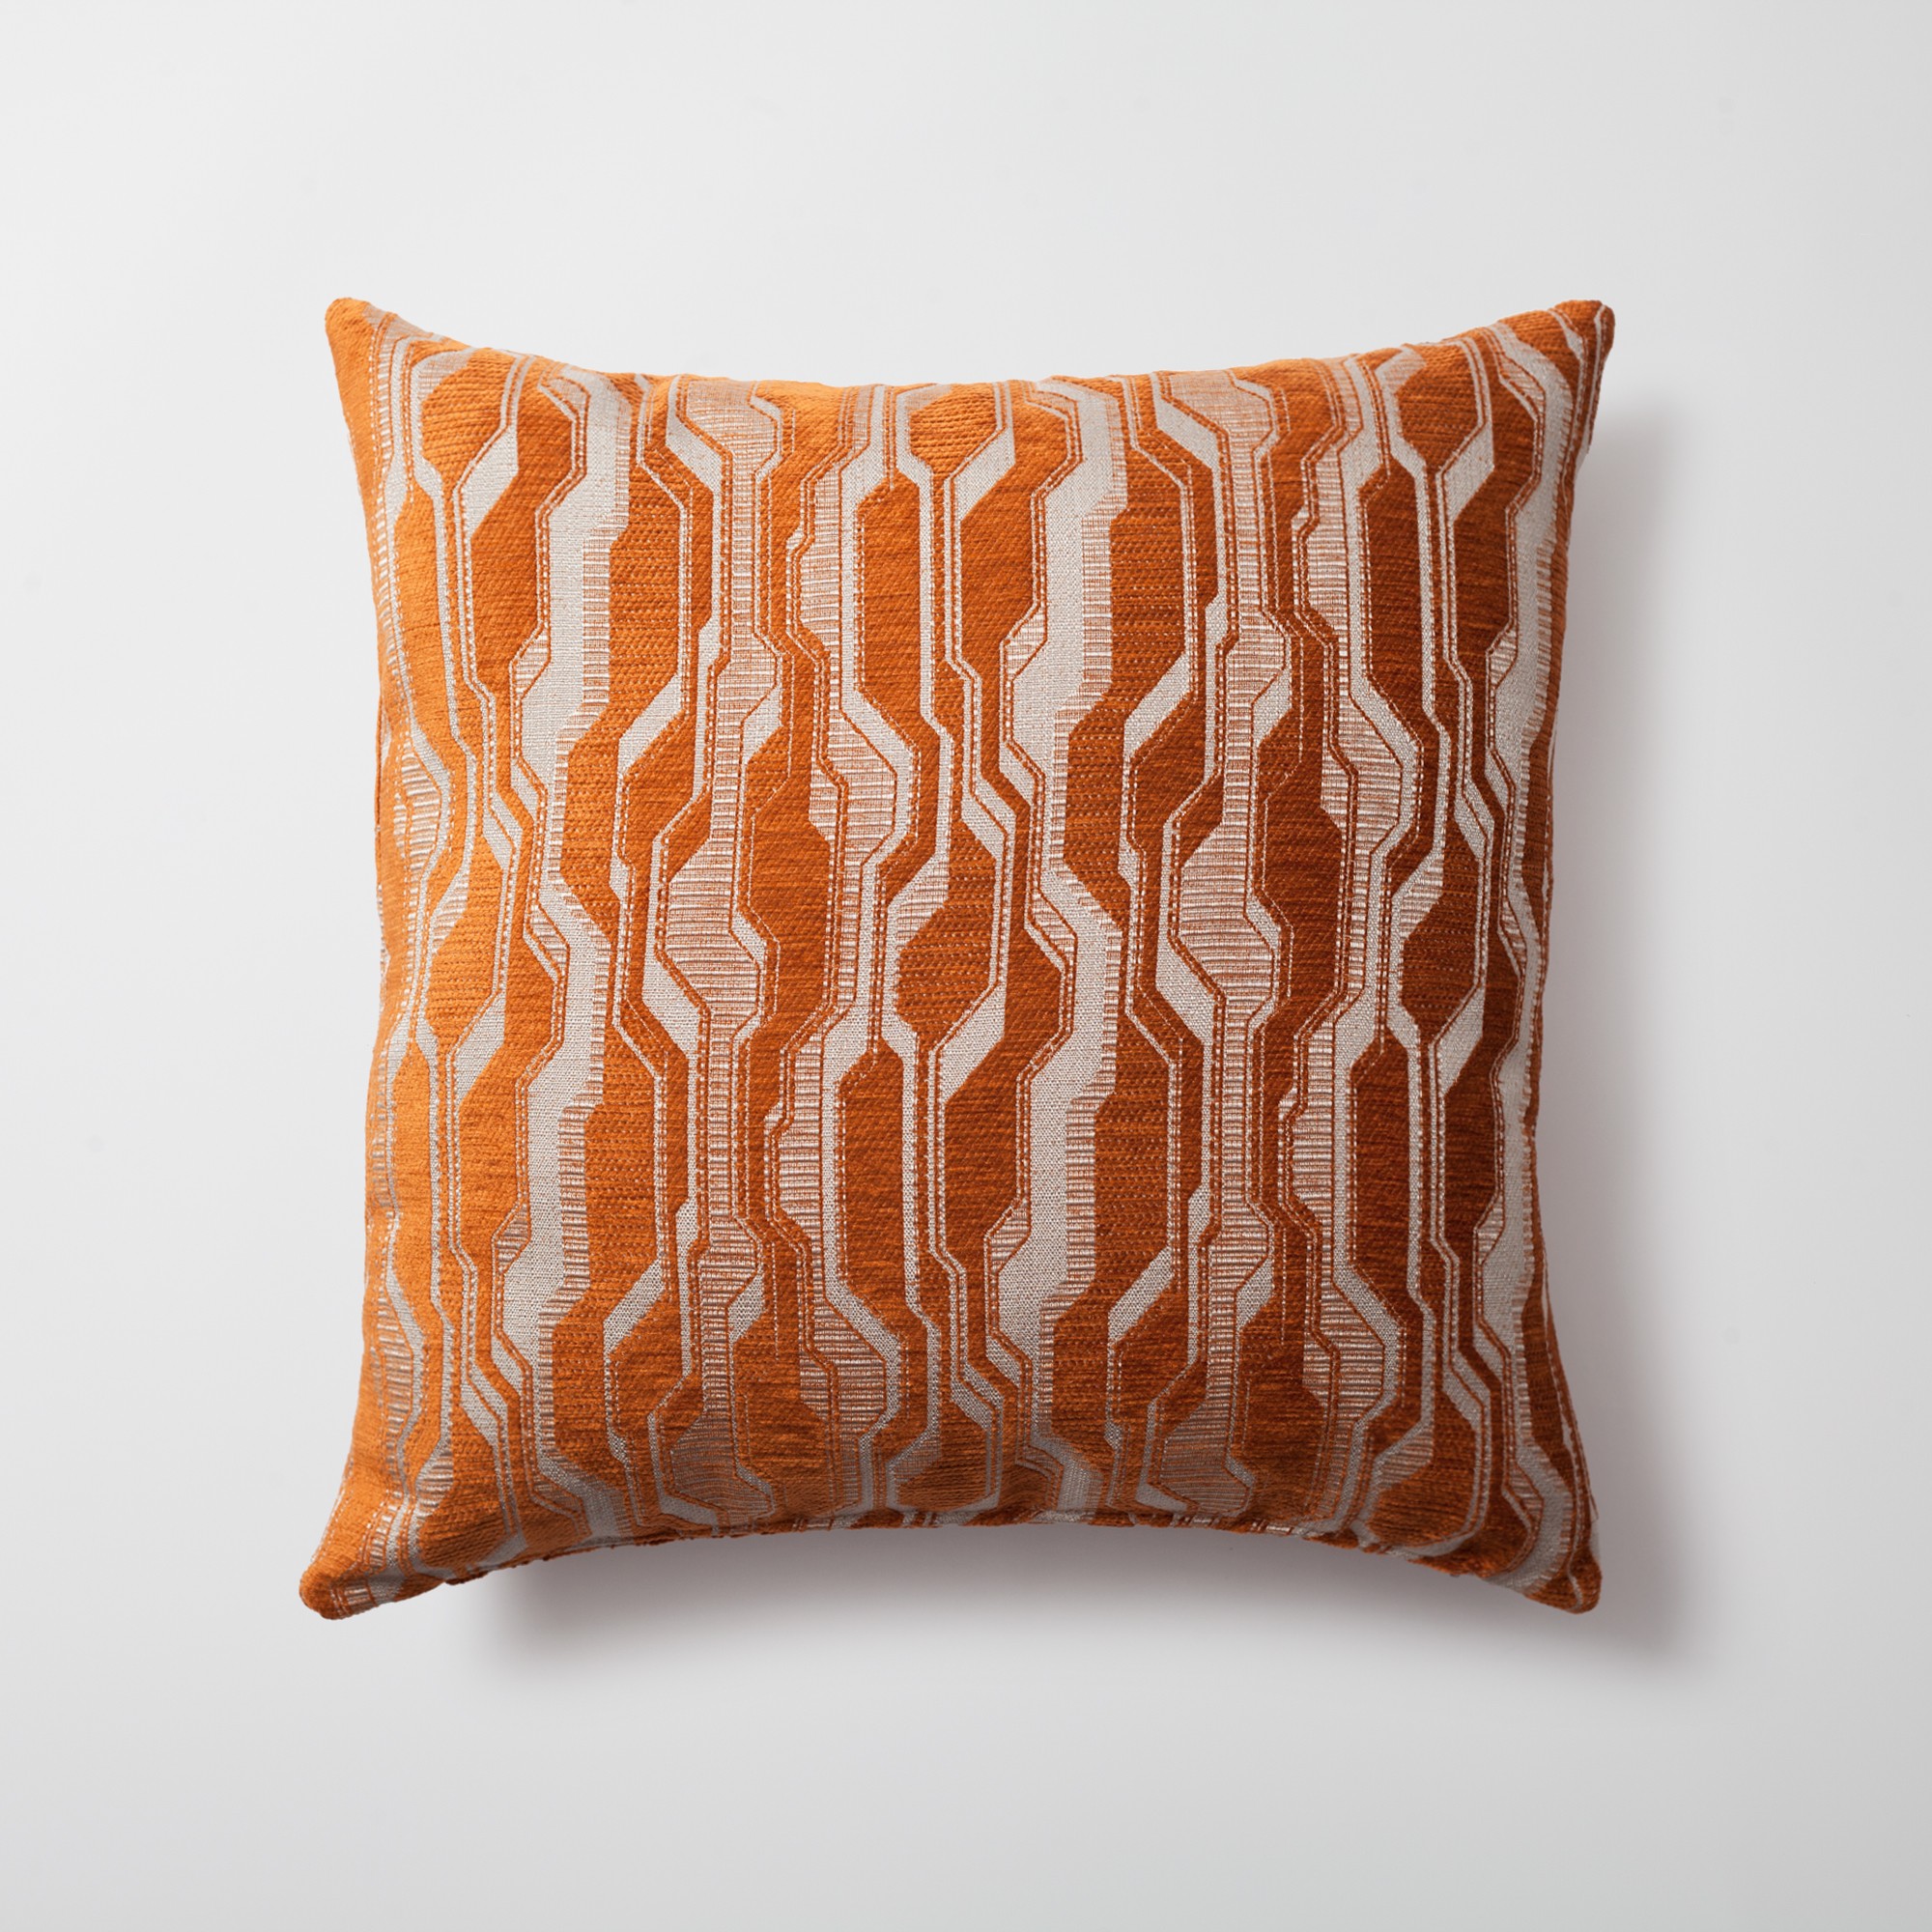 "Lebon" - Geometric Patterned 20x20 Inch Pillow - Orange (Cover Only)